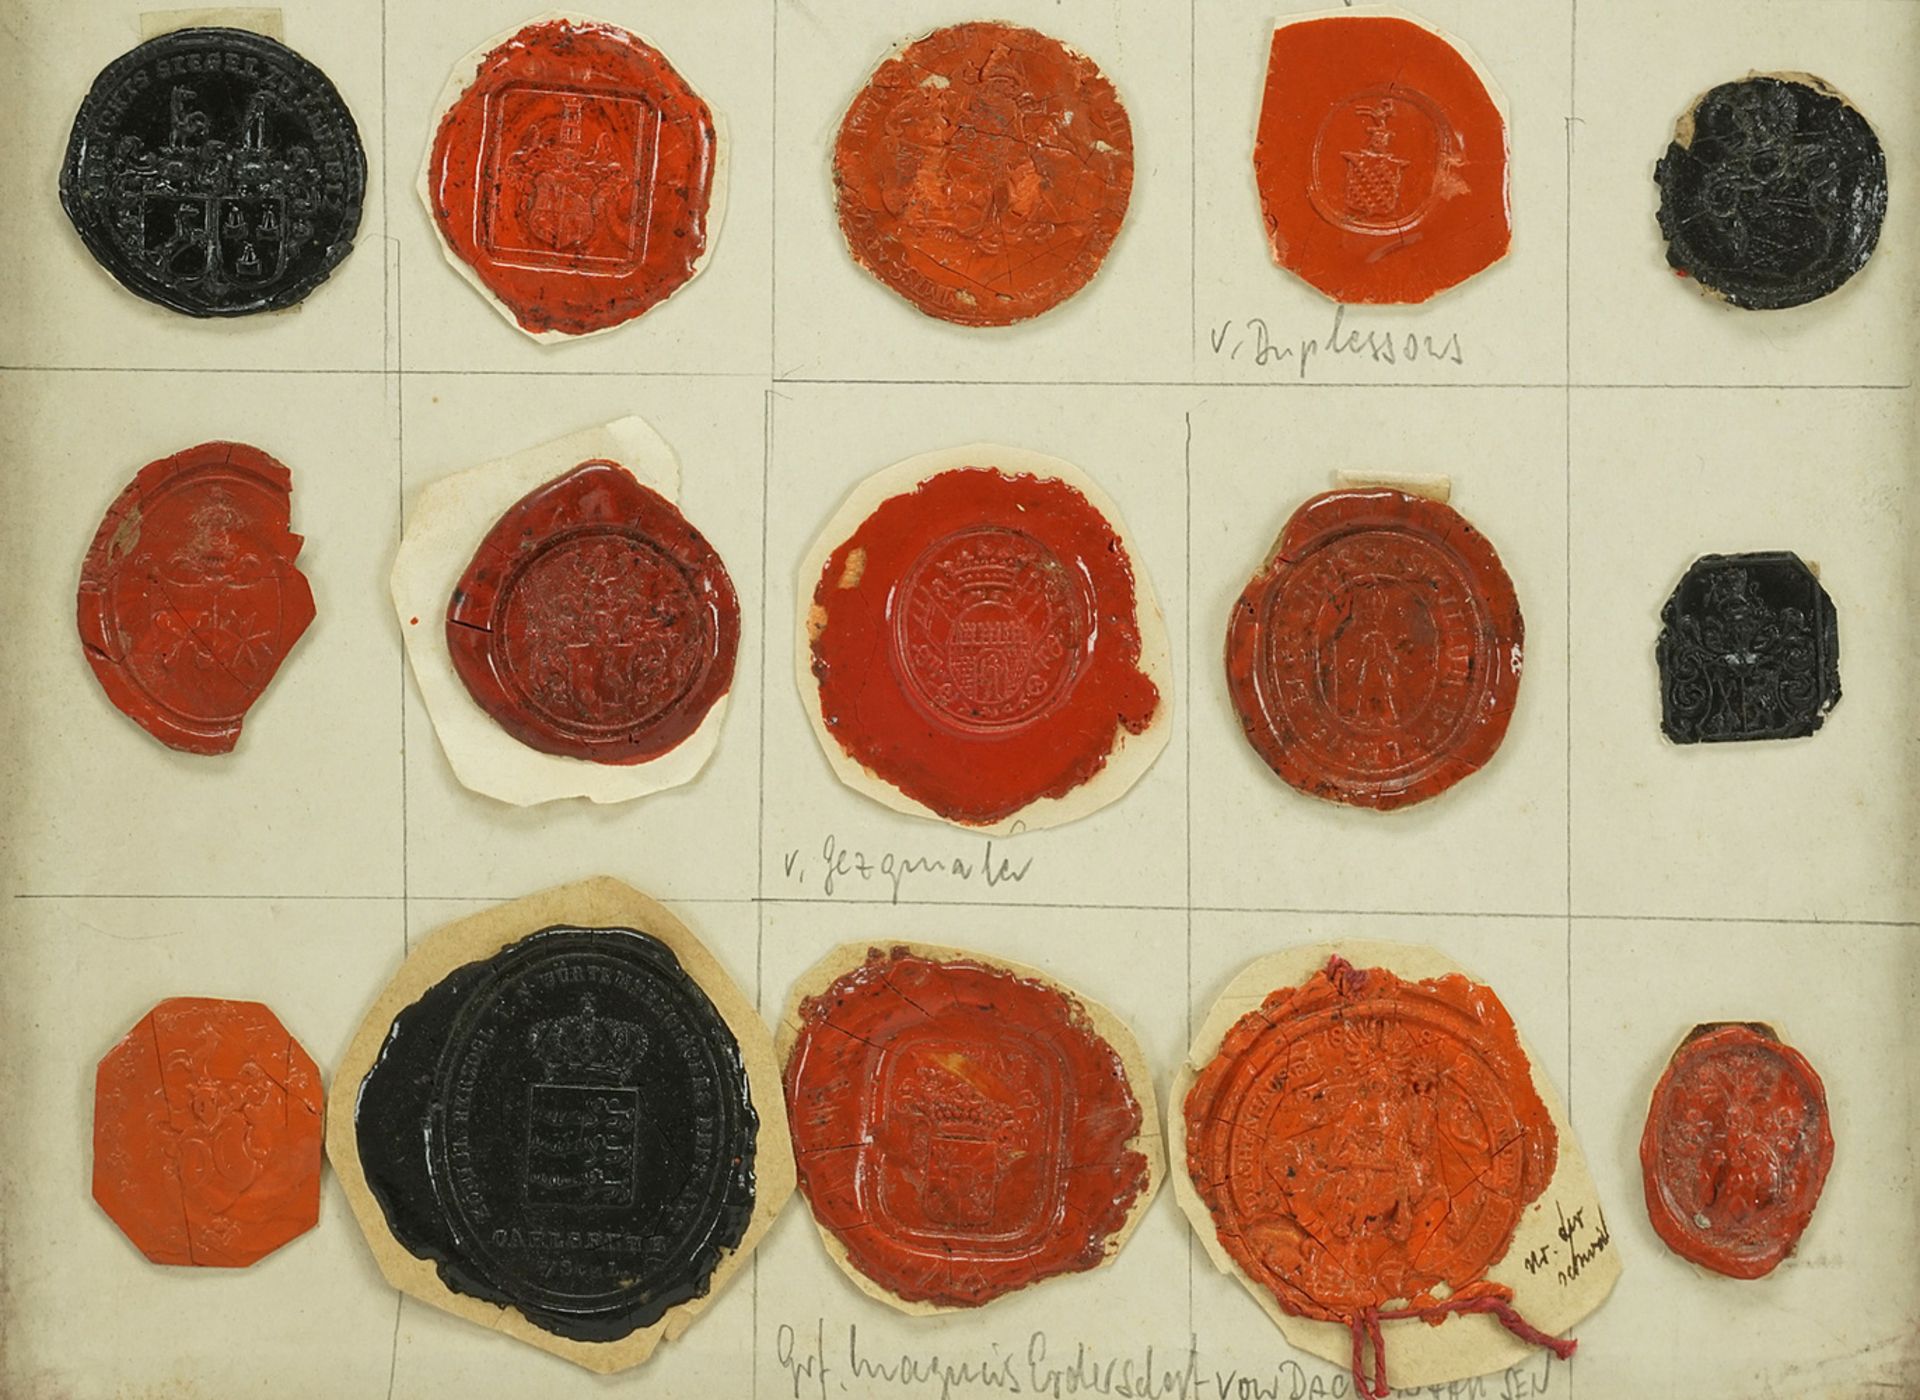 77 imprints of coats of arms seals of noble German families - Image 3 of 3